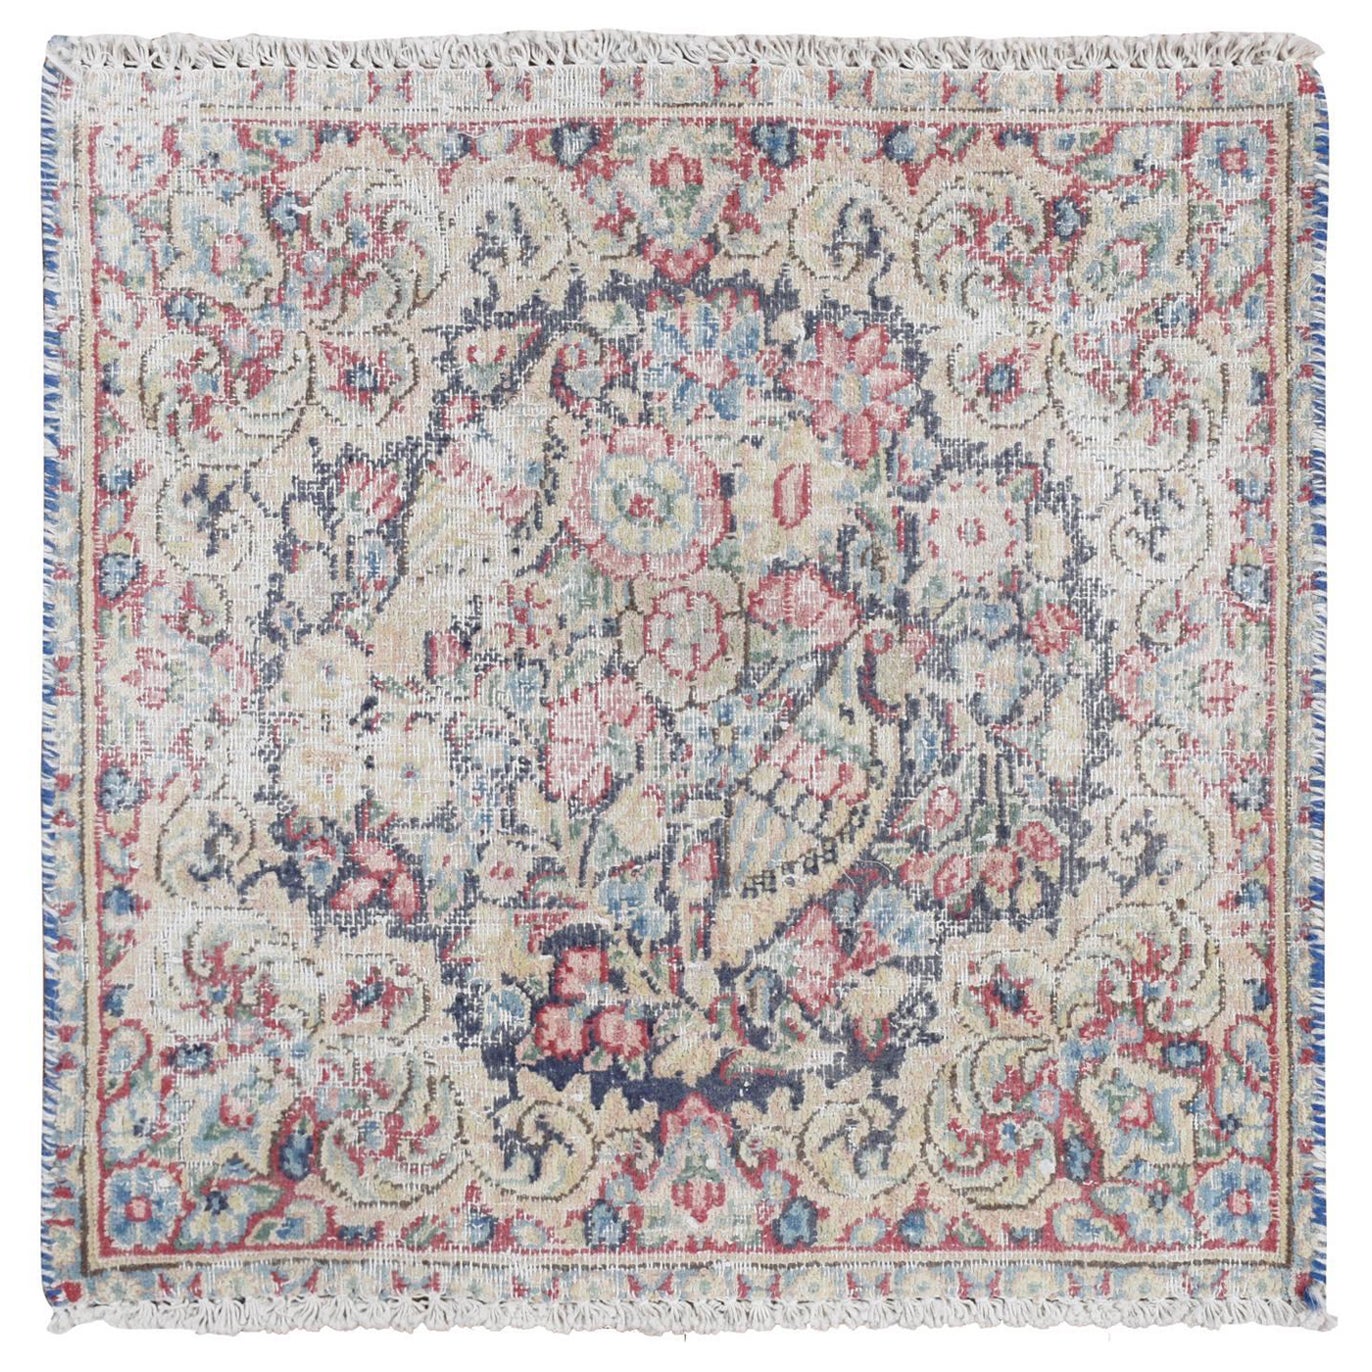 Blue Hand Knotted Old Persian Kerman Leaf and Bird Design All Wool Rug 1'7"x1'7" For Sale